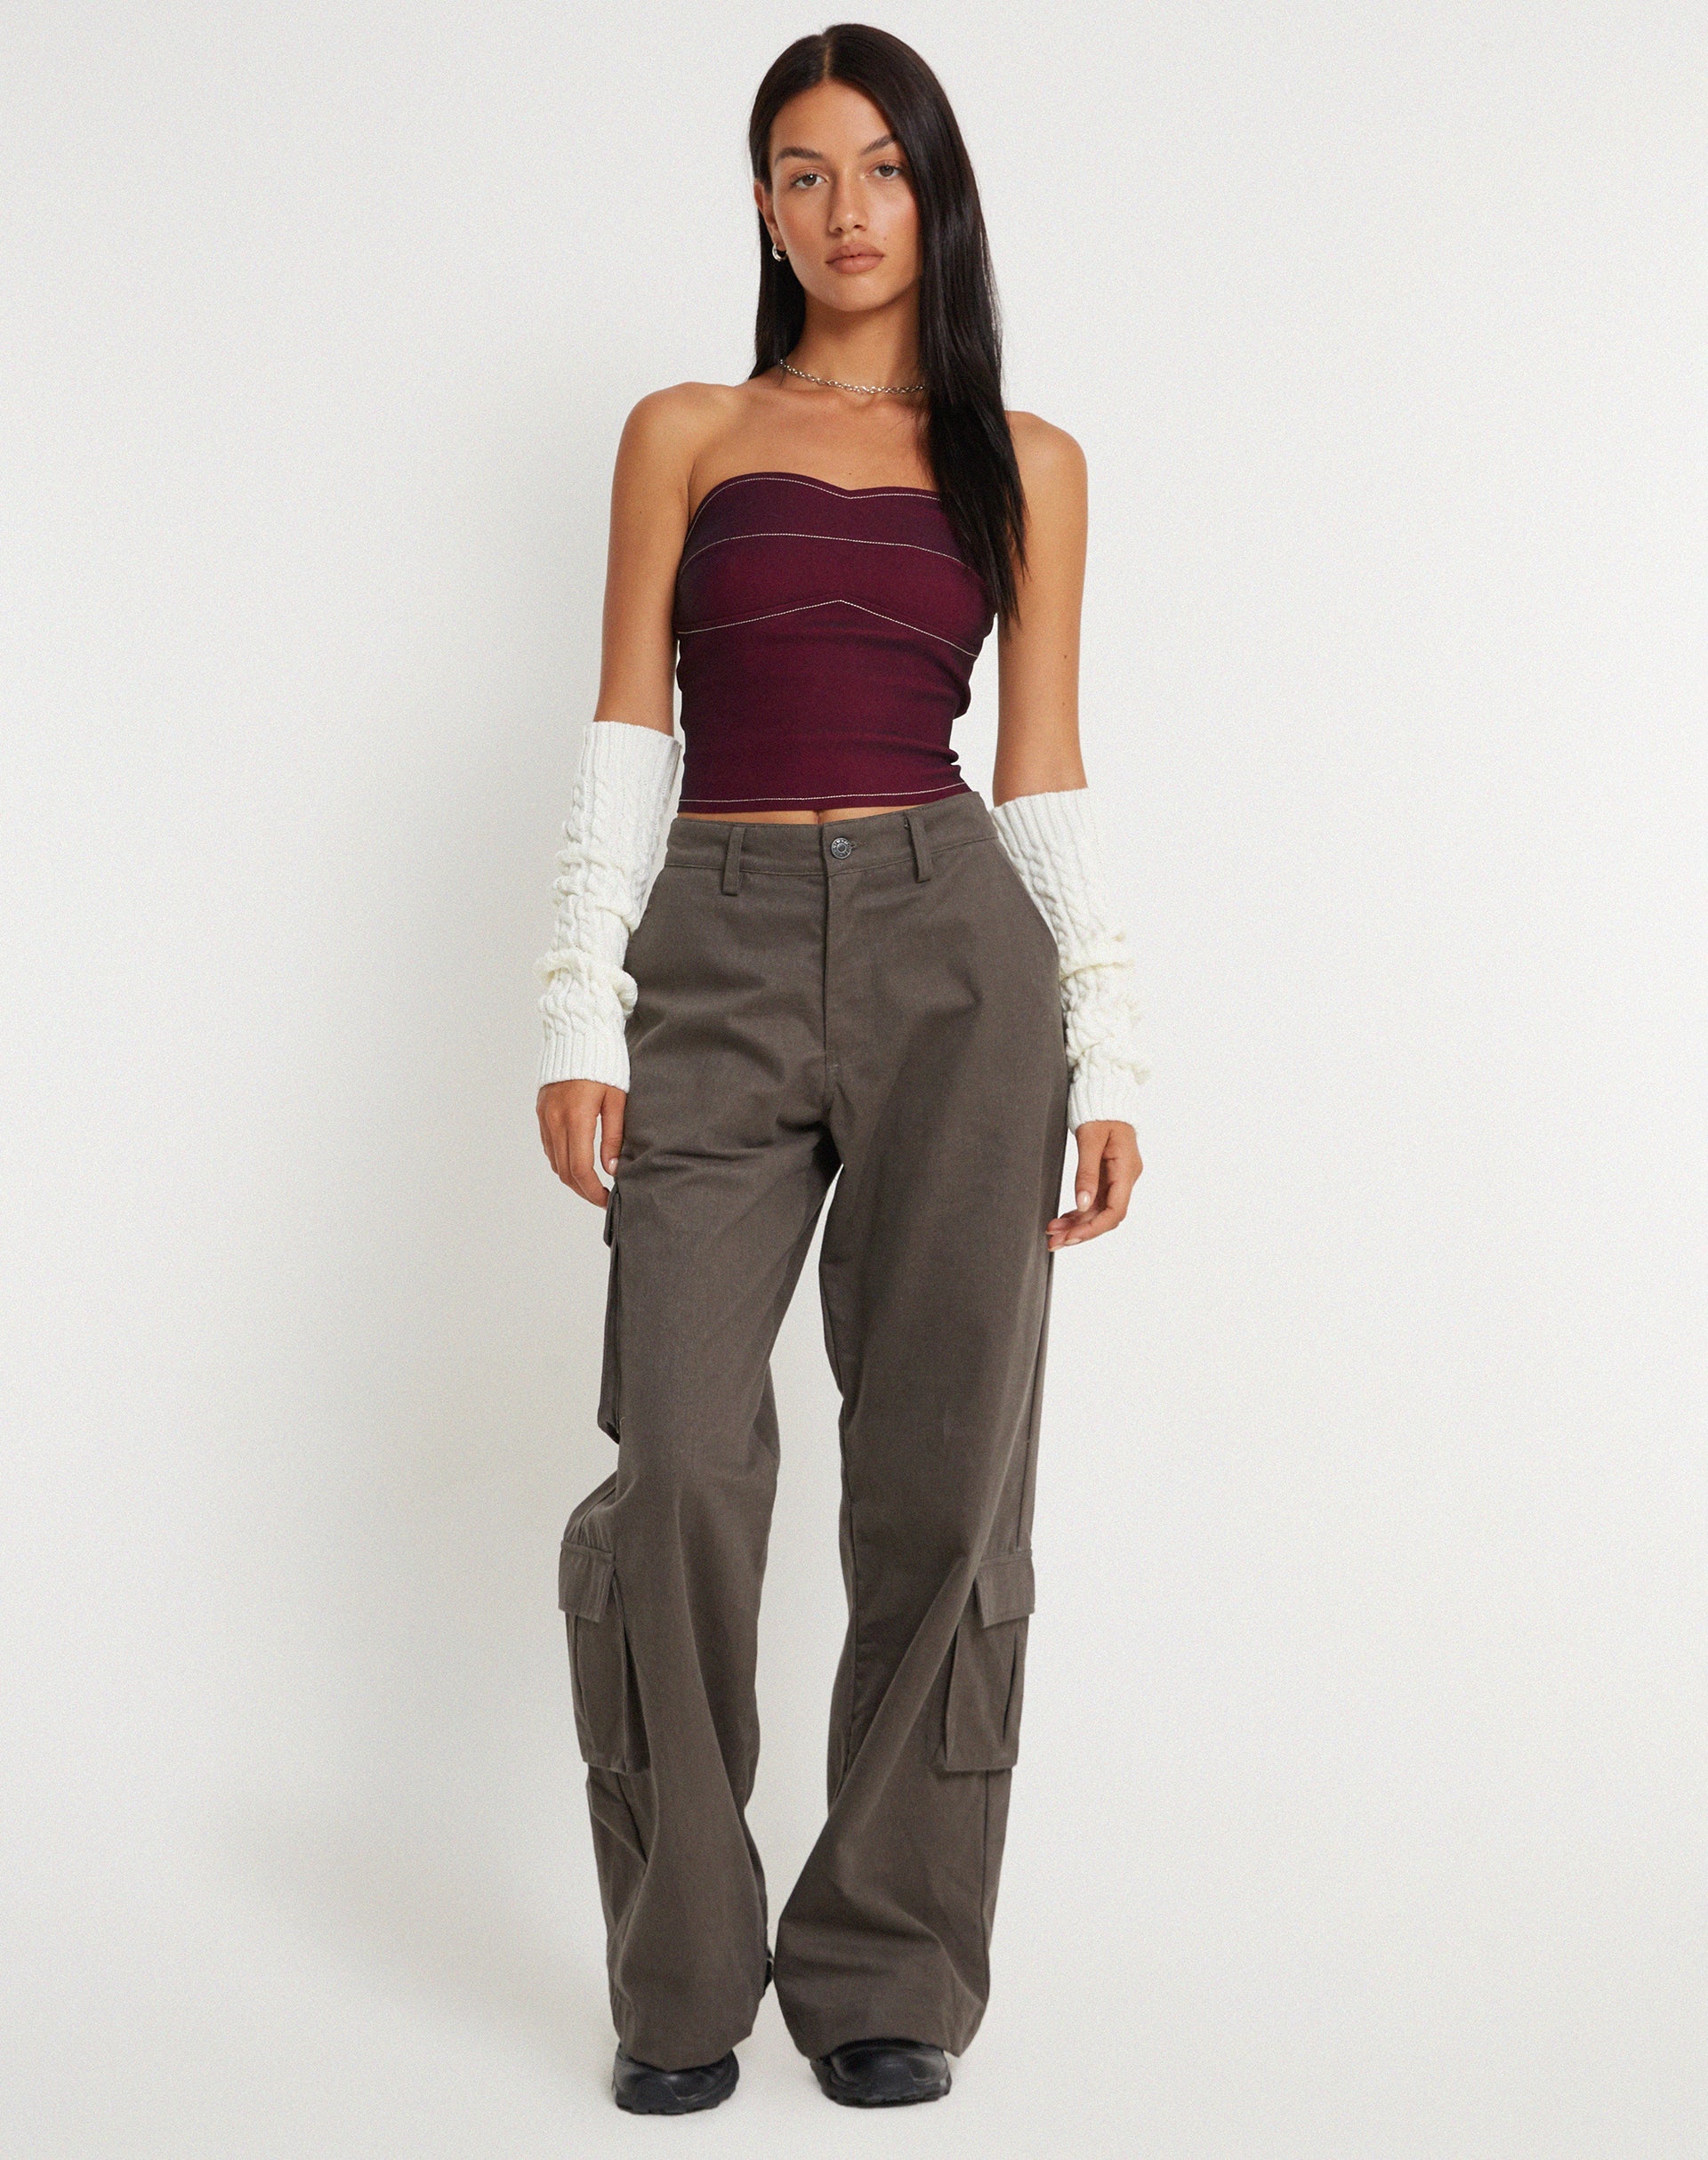 image of Nelly Cropped Corset Top in Burgundy with Ecru Stitch Detail